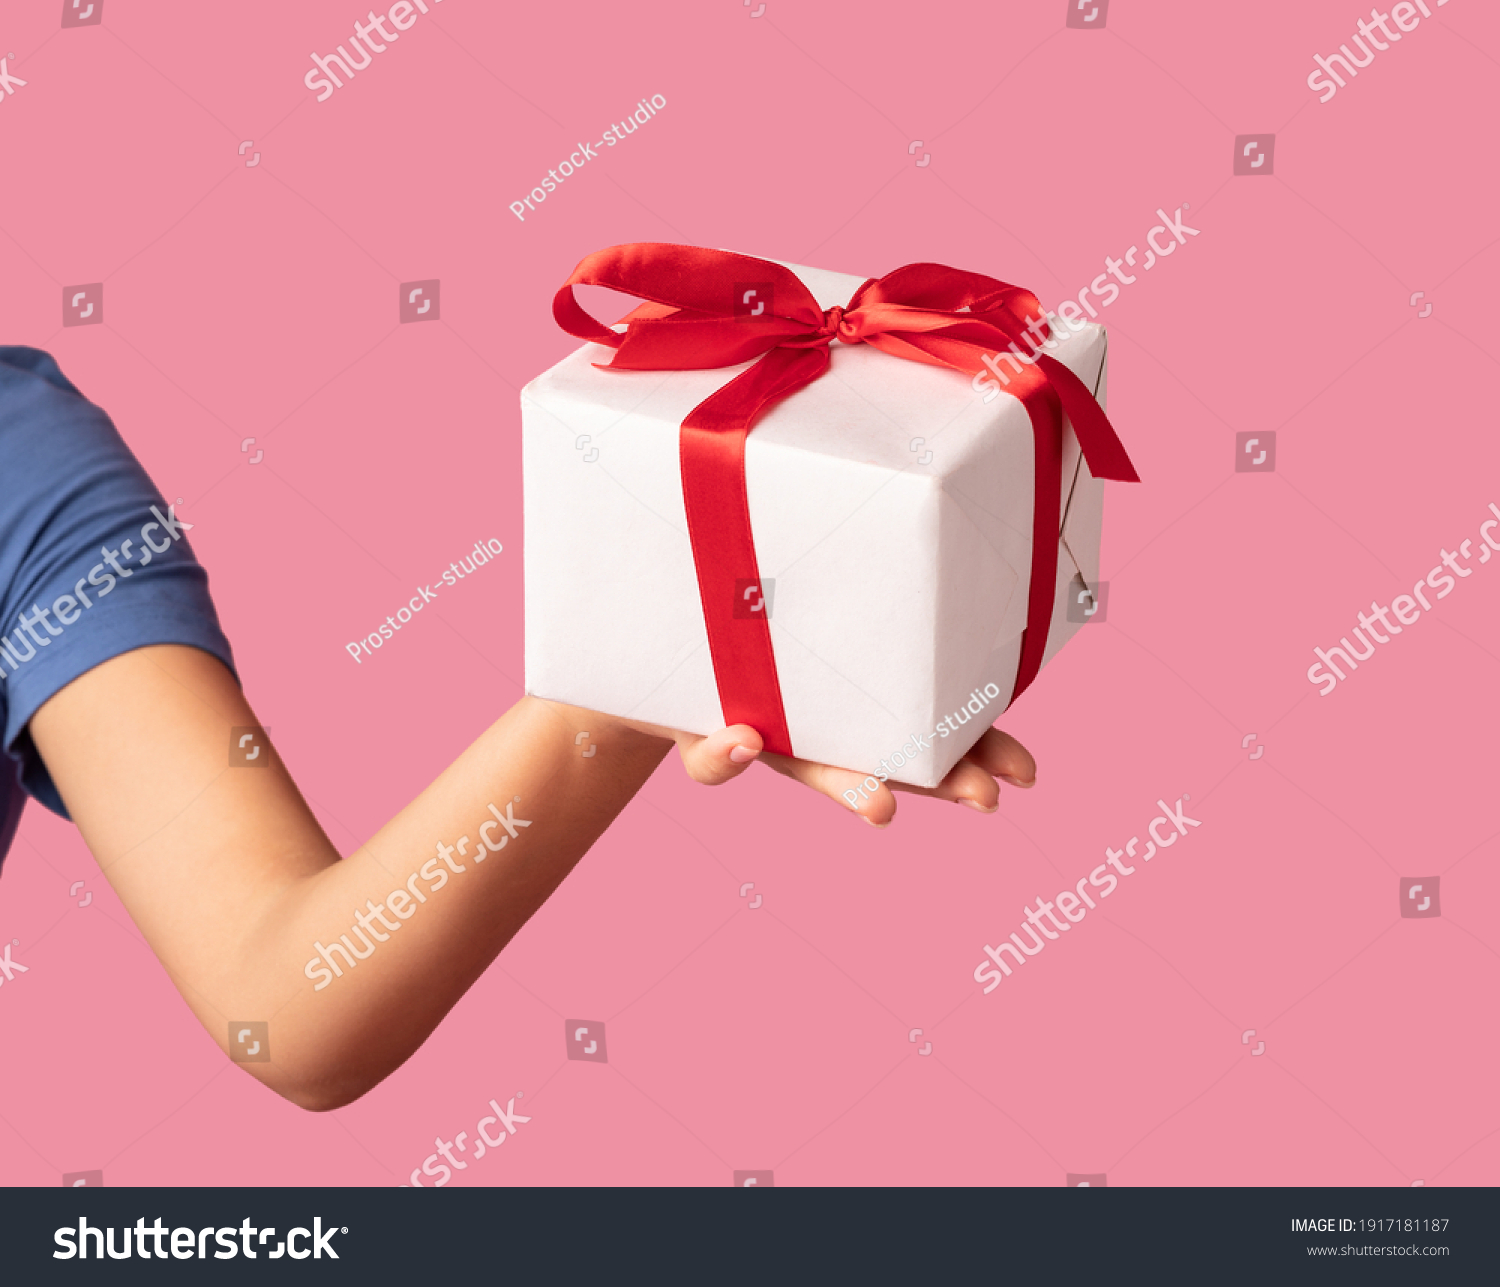 Greeting And Celebration Concept. Closeup of unrecognizable young woman holding and showing wrapped present box to camera, giving gift isolated over pastel pink studio background #1917181187